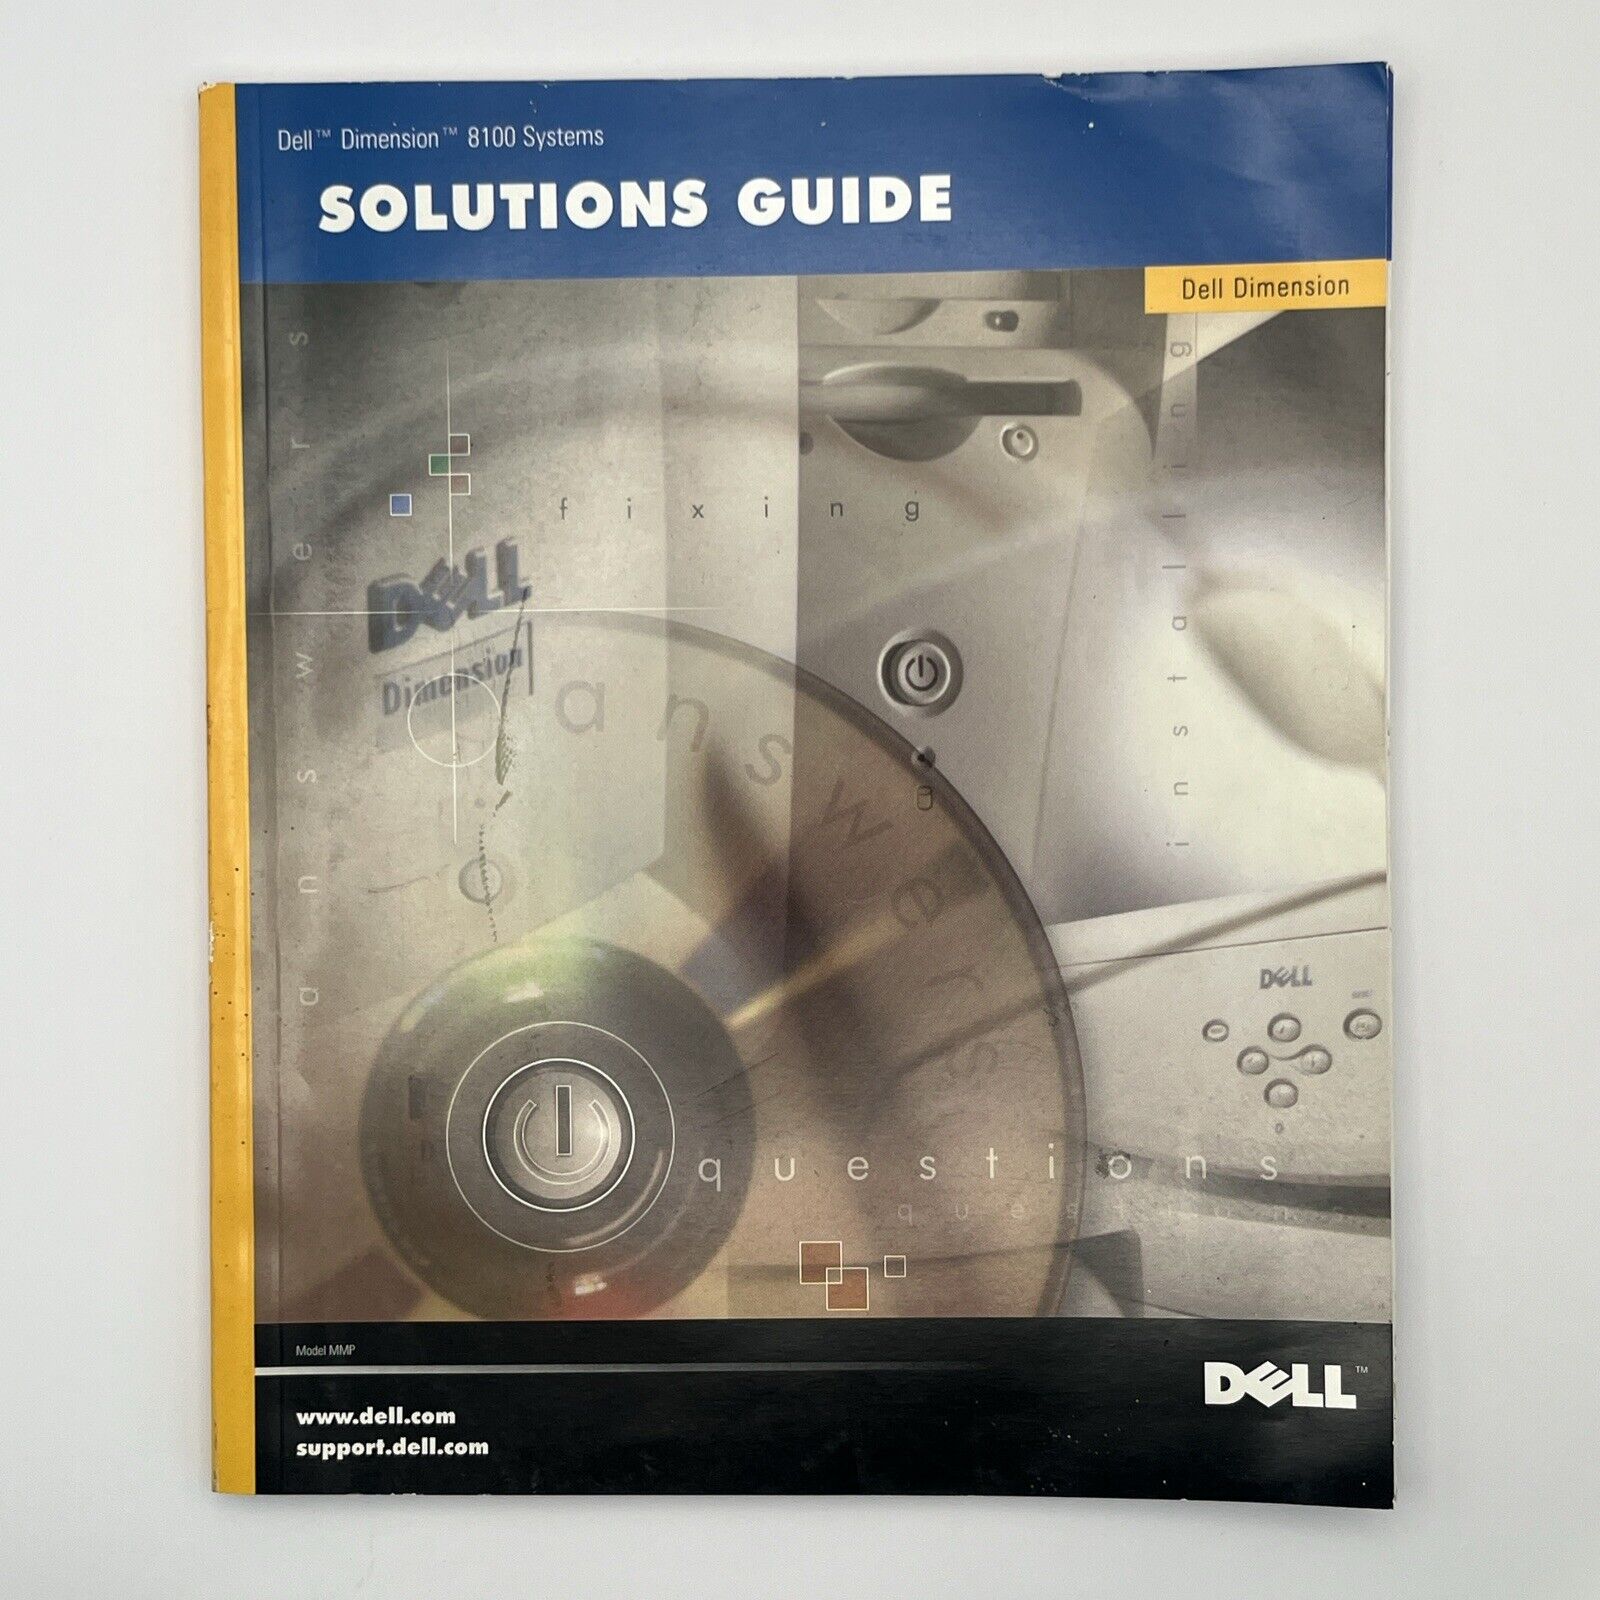 Dell Dimension 8100 Systems Solutions Guide Vintage May 2001 English 90 Pages